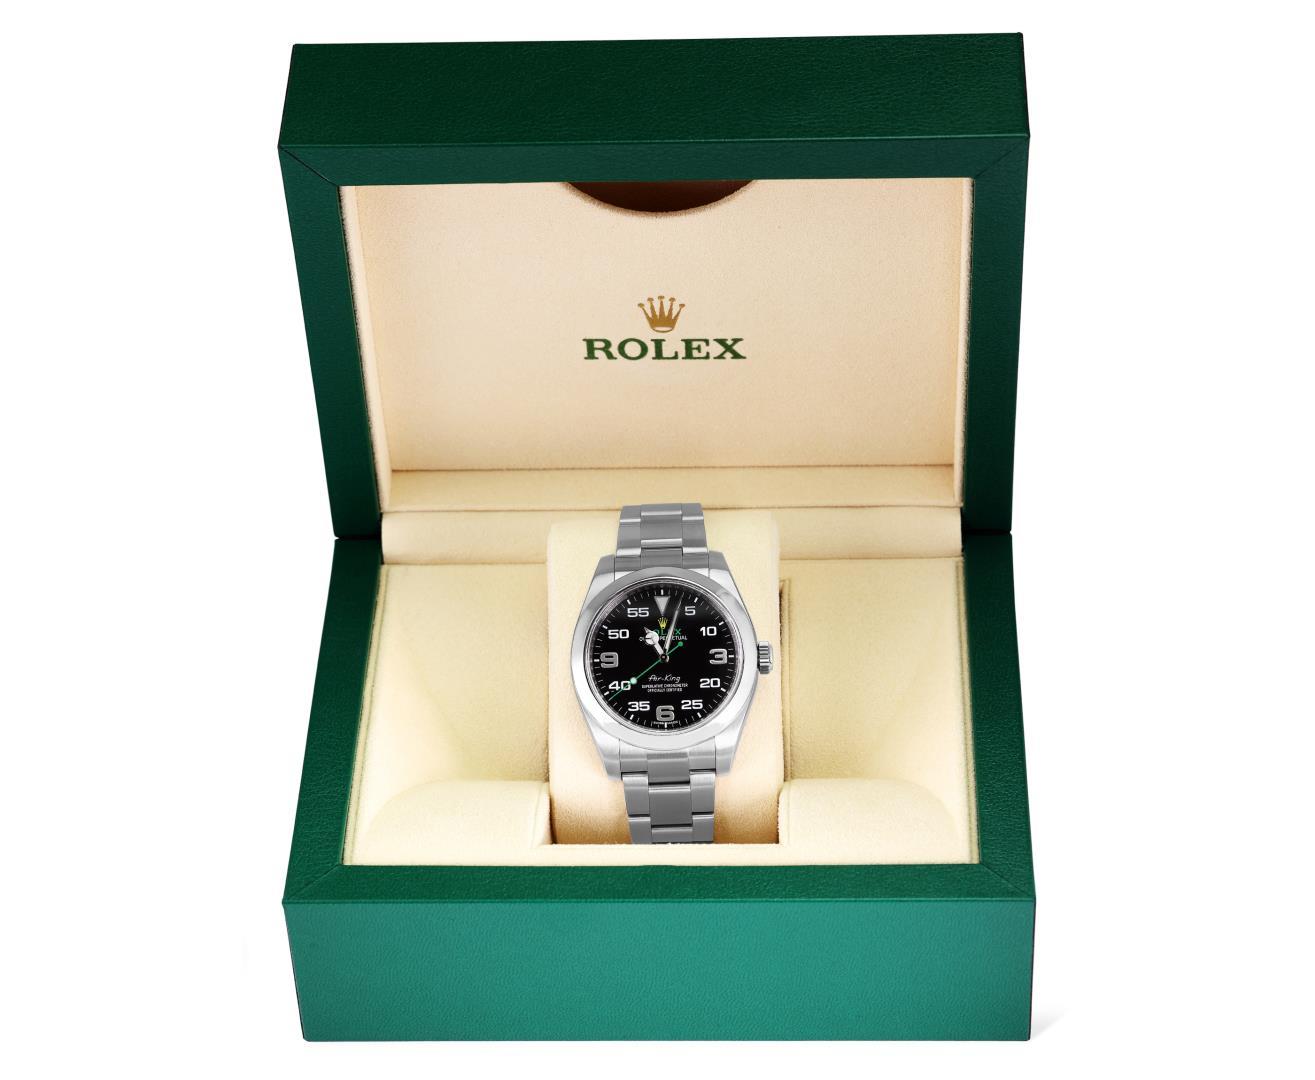 Rolex Mens Stainless Steel Air King Wristwatch With Rolex Box